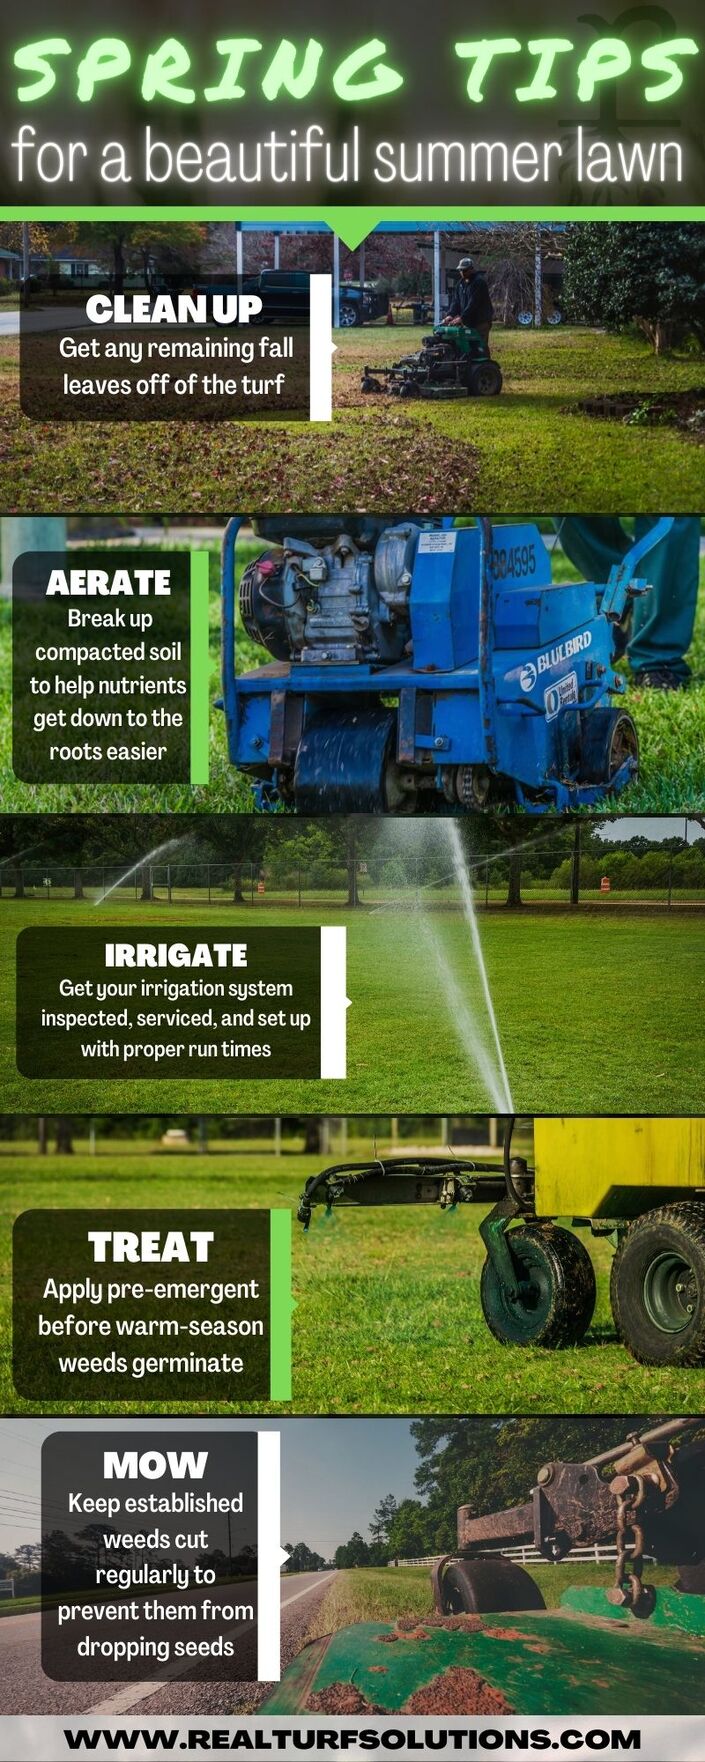 Spring Tips Infographic